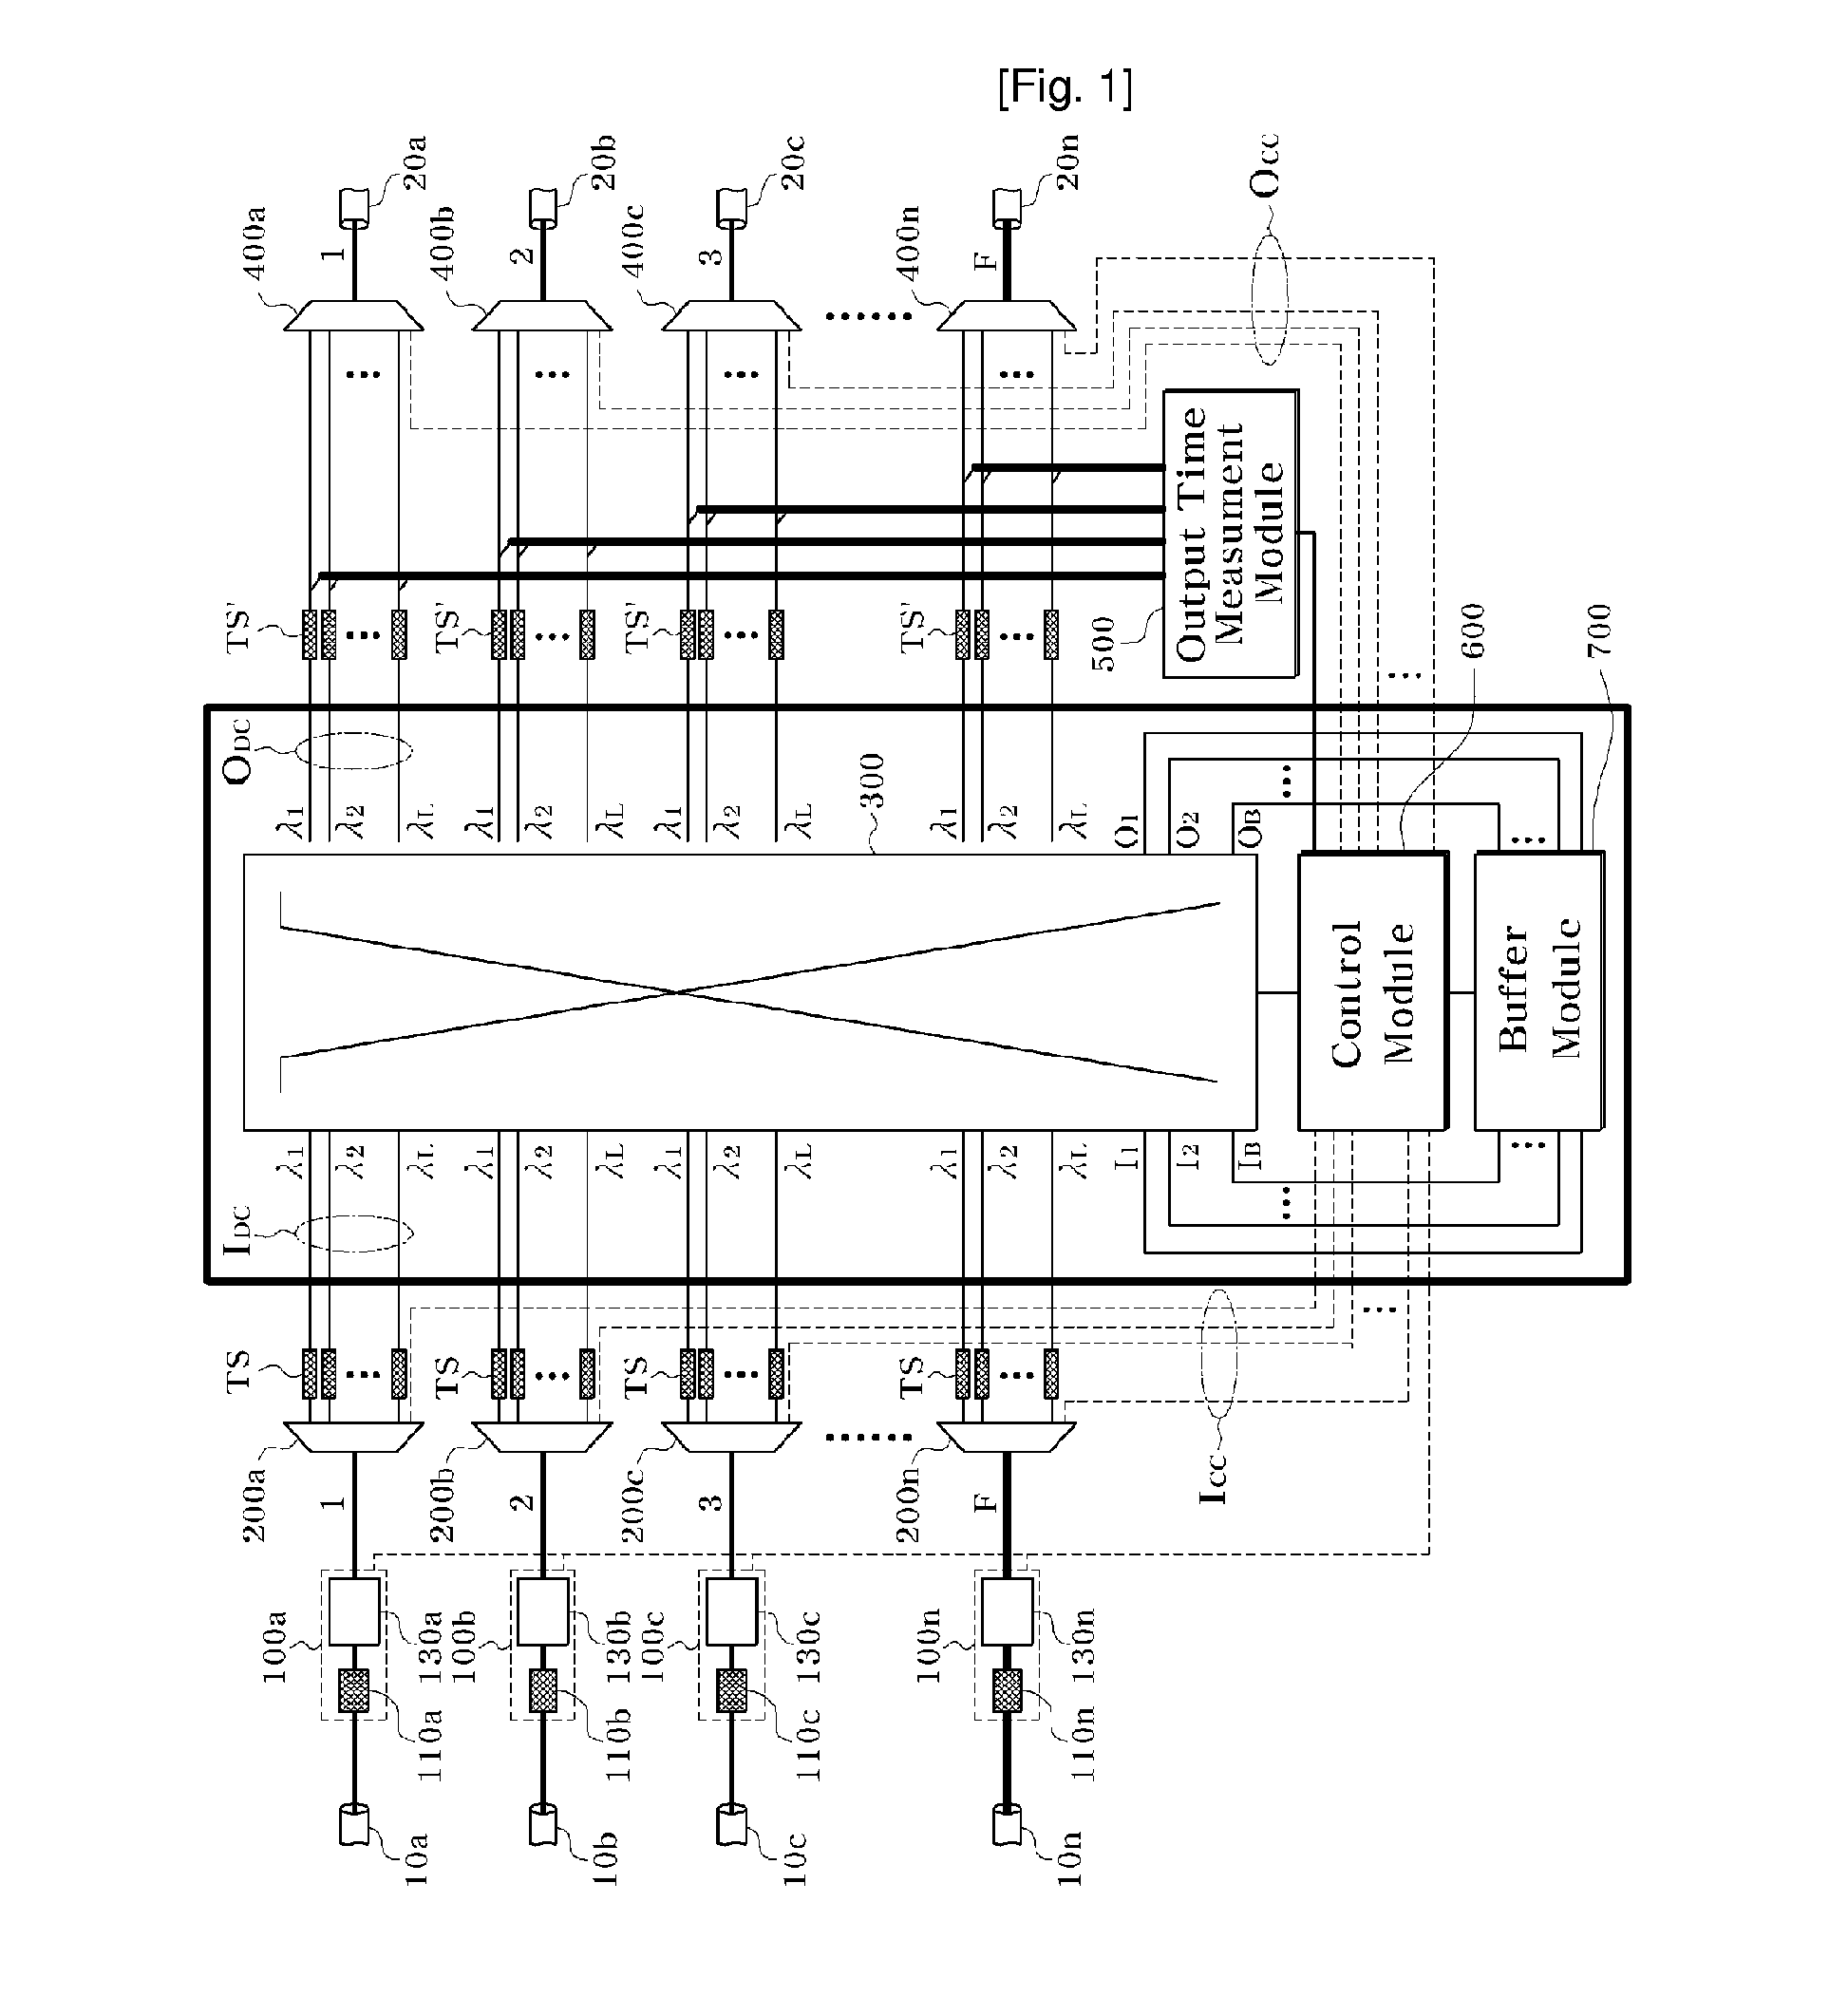 Apparatus for Transferring Optical Data in Optical Switching System Using Time Synchronization